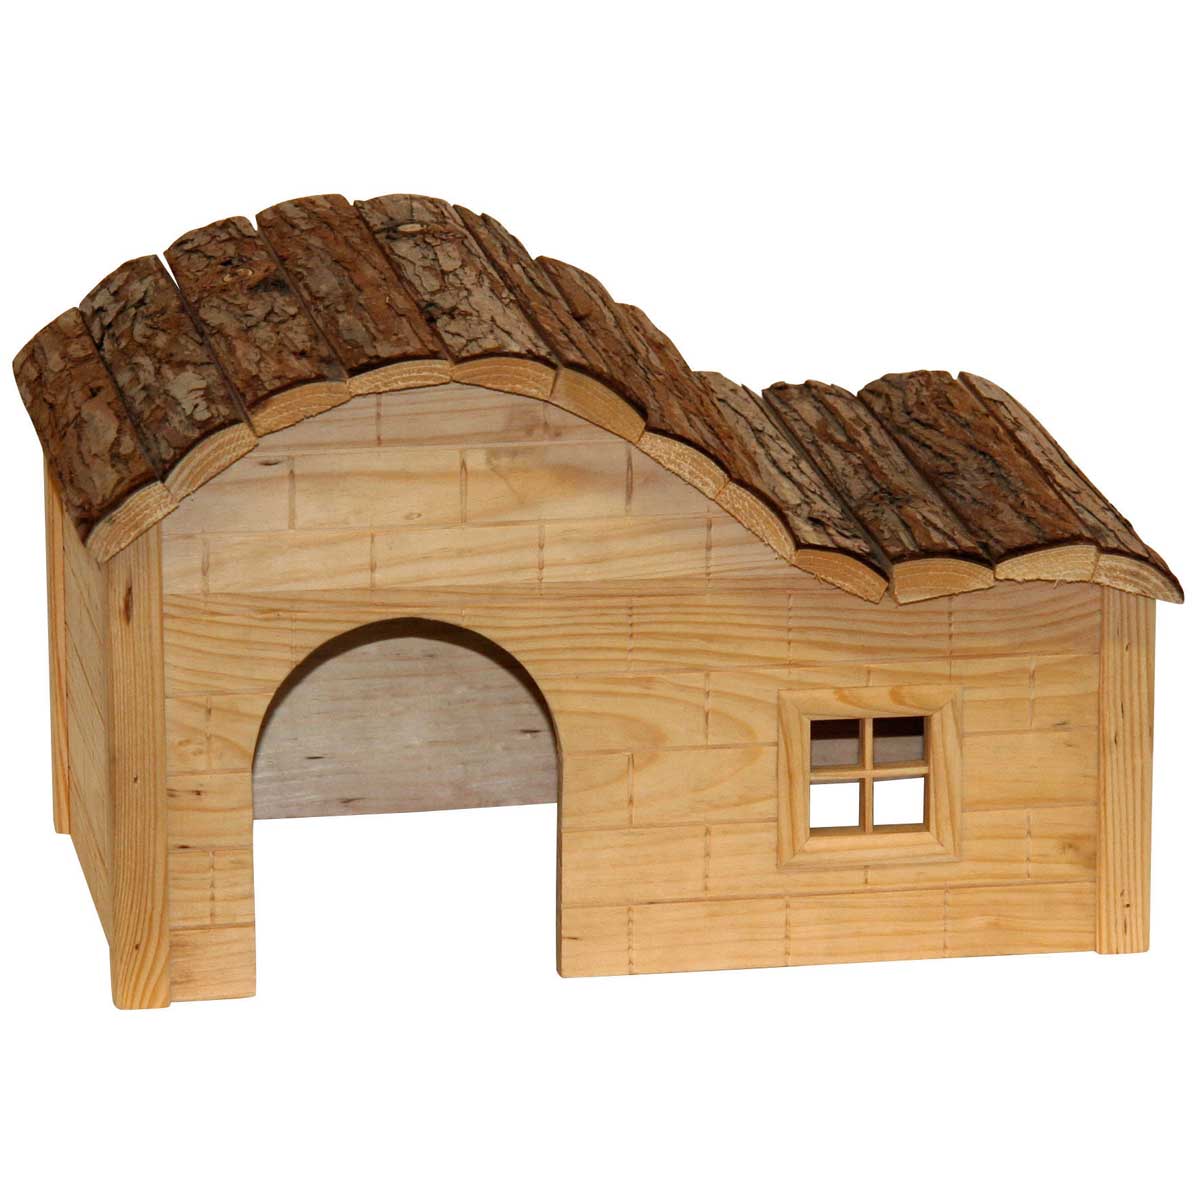 NATURE PLUS House with gently curved roof 30 x 20 x 20 cm